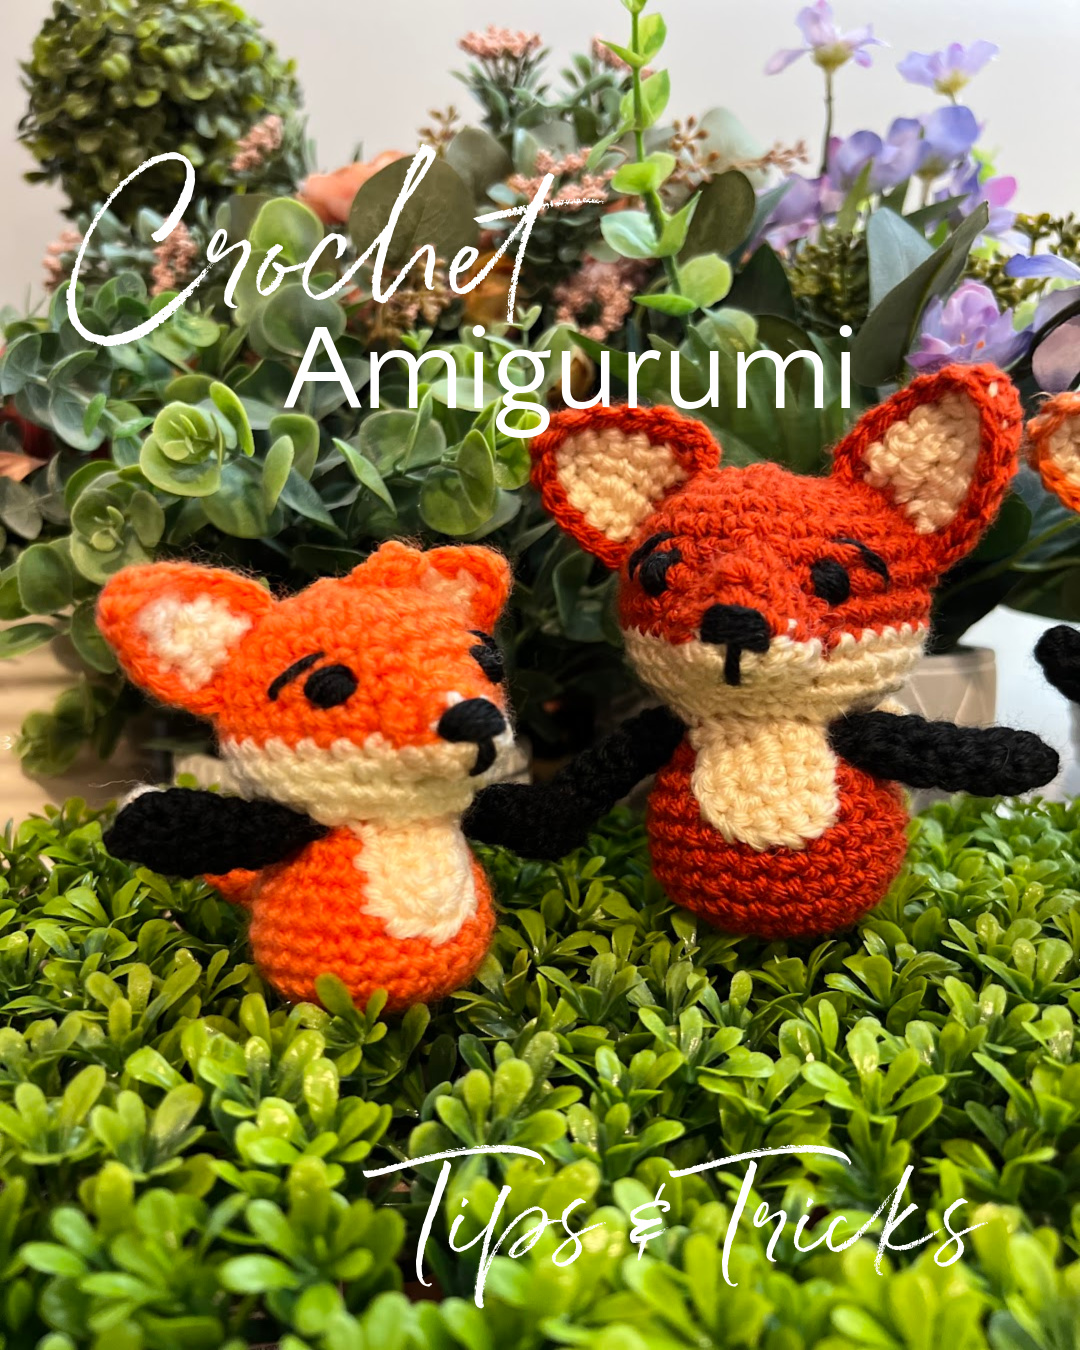 Two small crochet amigurumi foxes sitting on green leaves with green leafy background - Marly Bird.